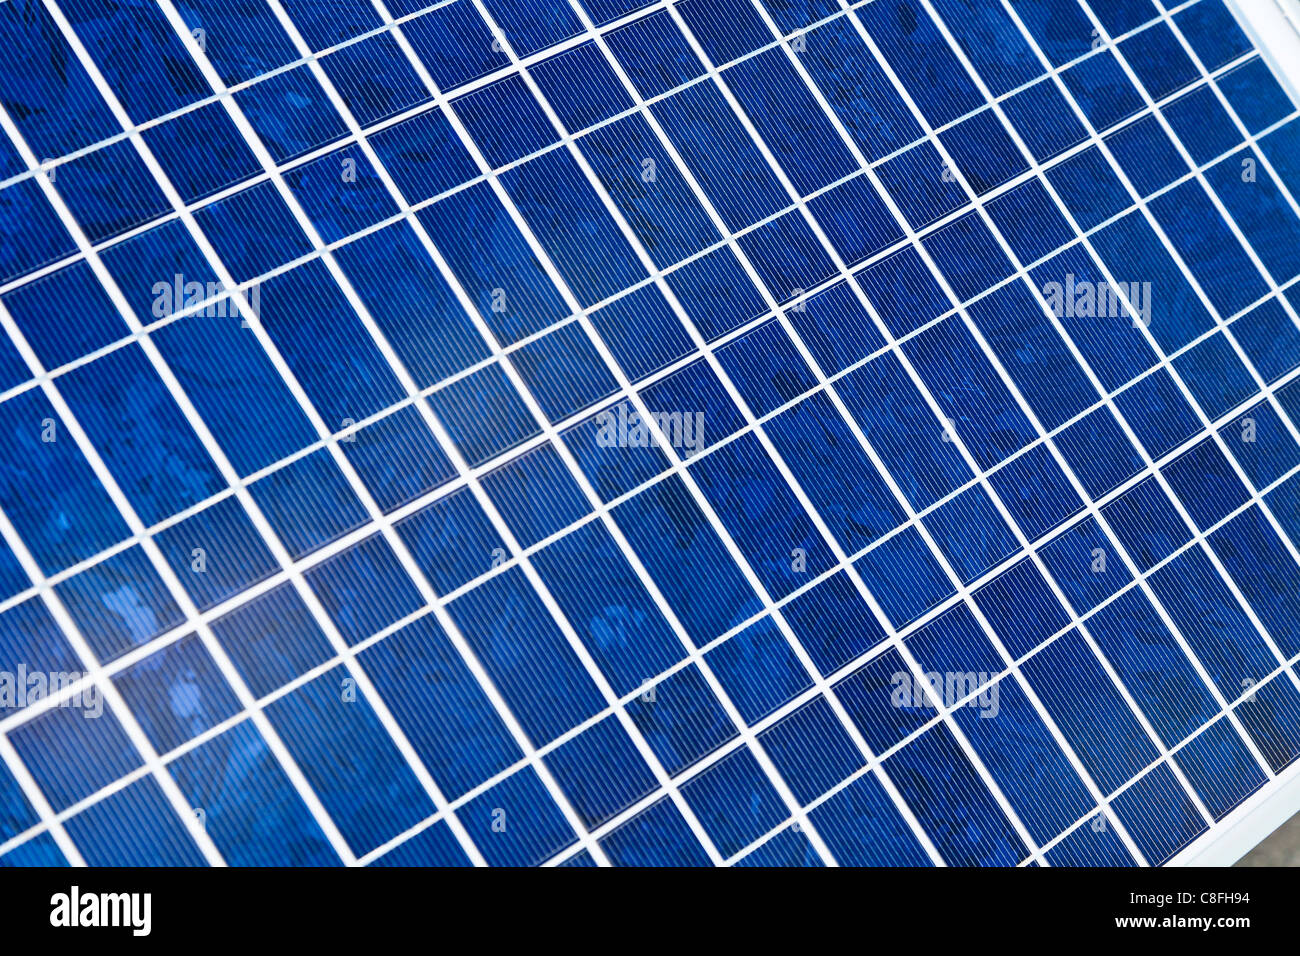 Close-up of solar panel used to power electric generator. Stock Photo